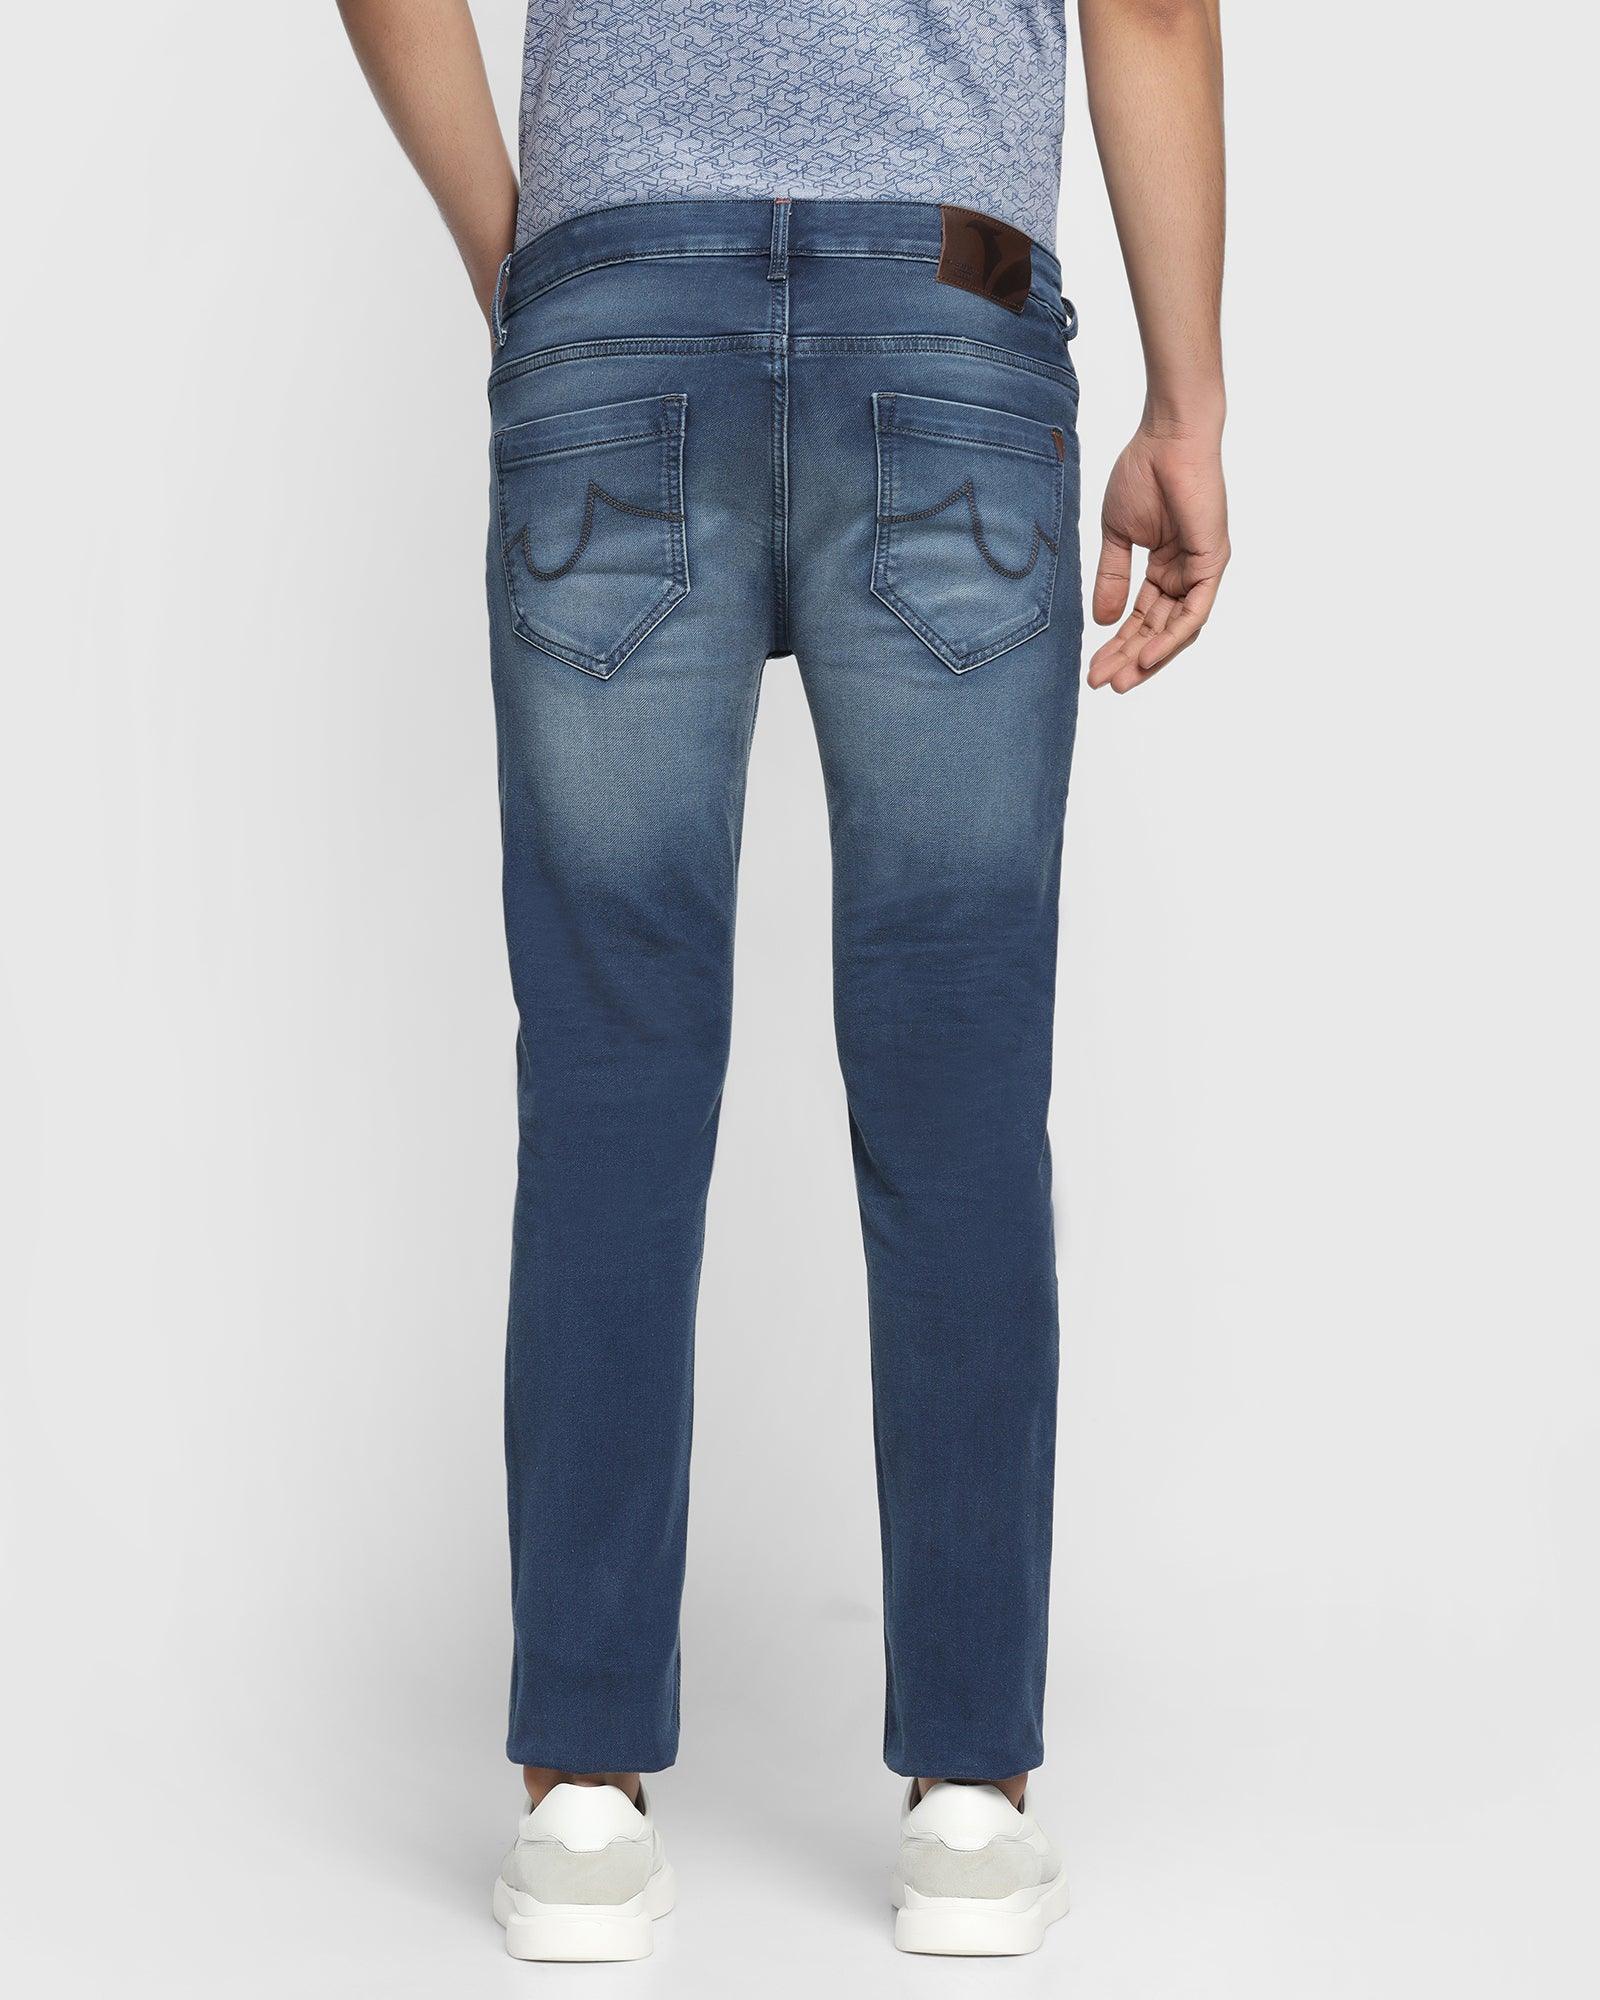 Relaxed Fit Super Soft Jeans - Light denim blue - Kids | H&M IN